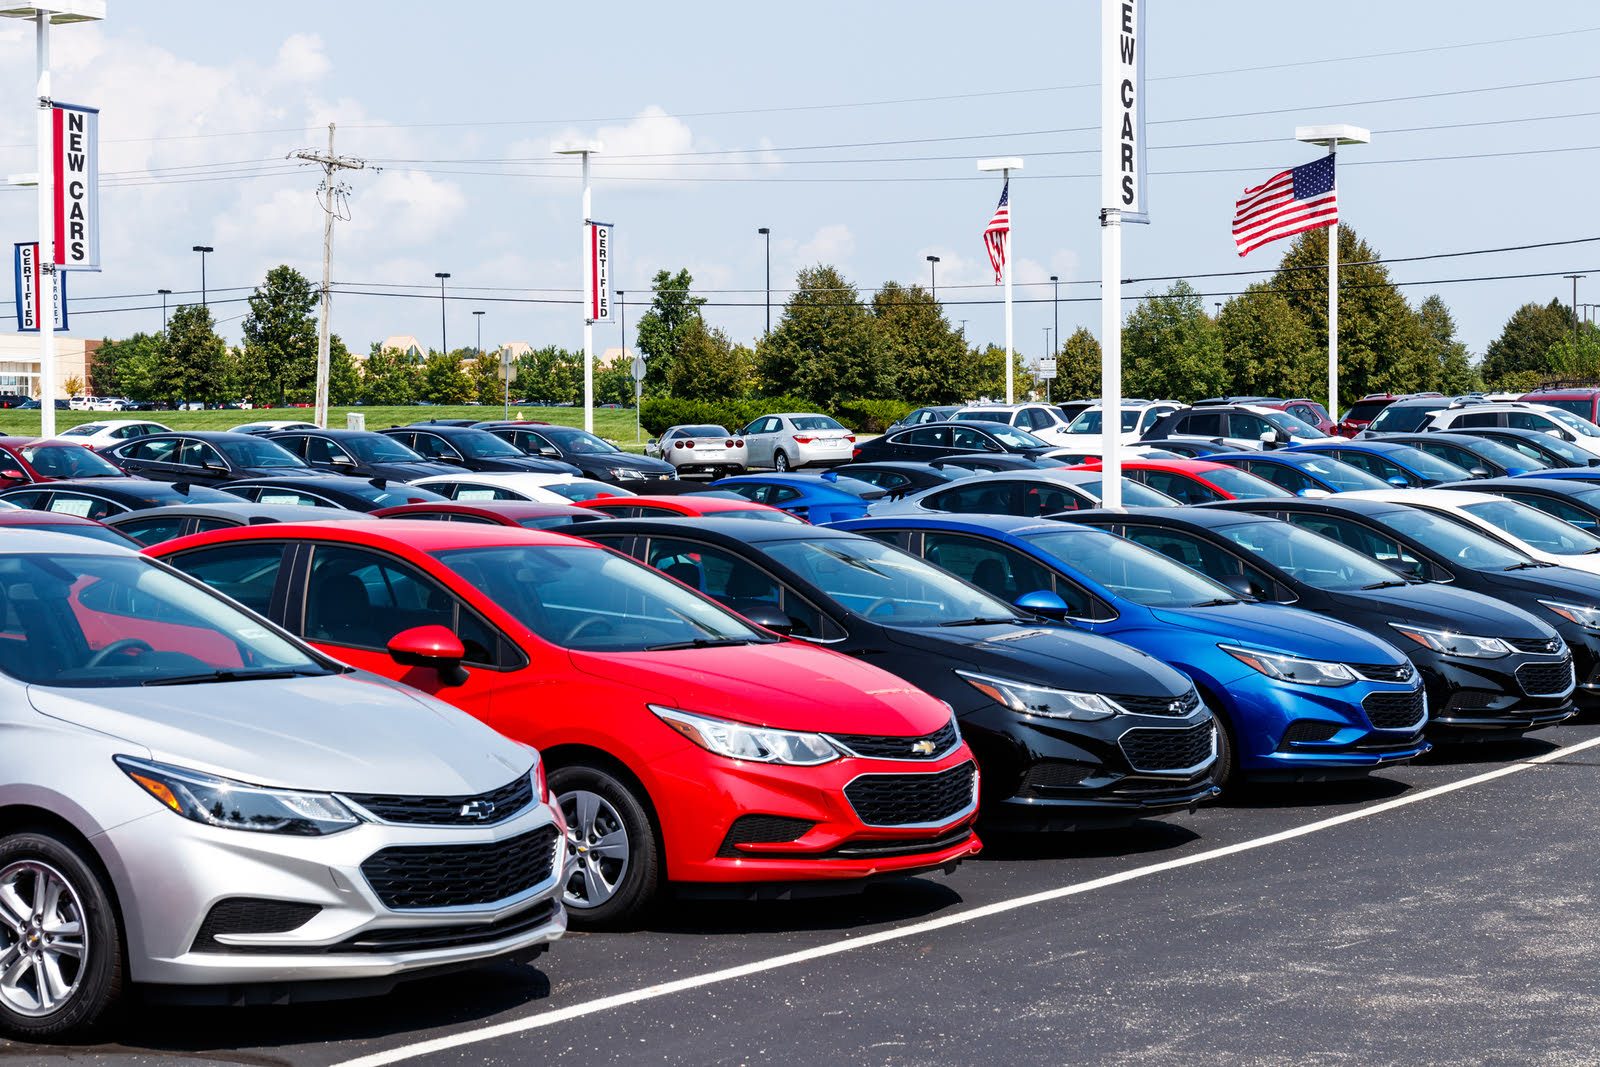 How to Find a Great Car Dealership - CarGurus